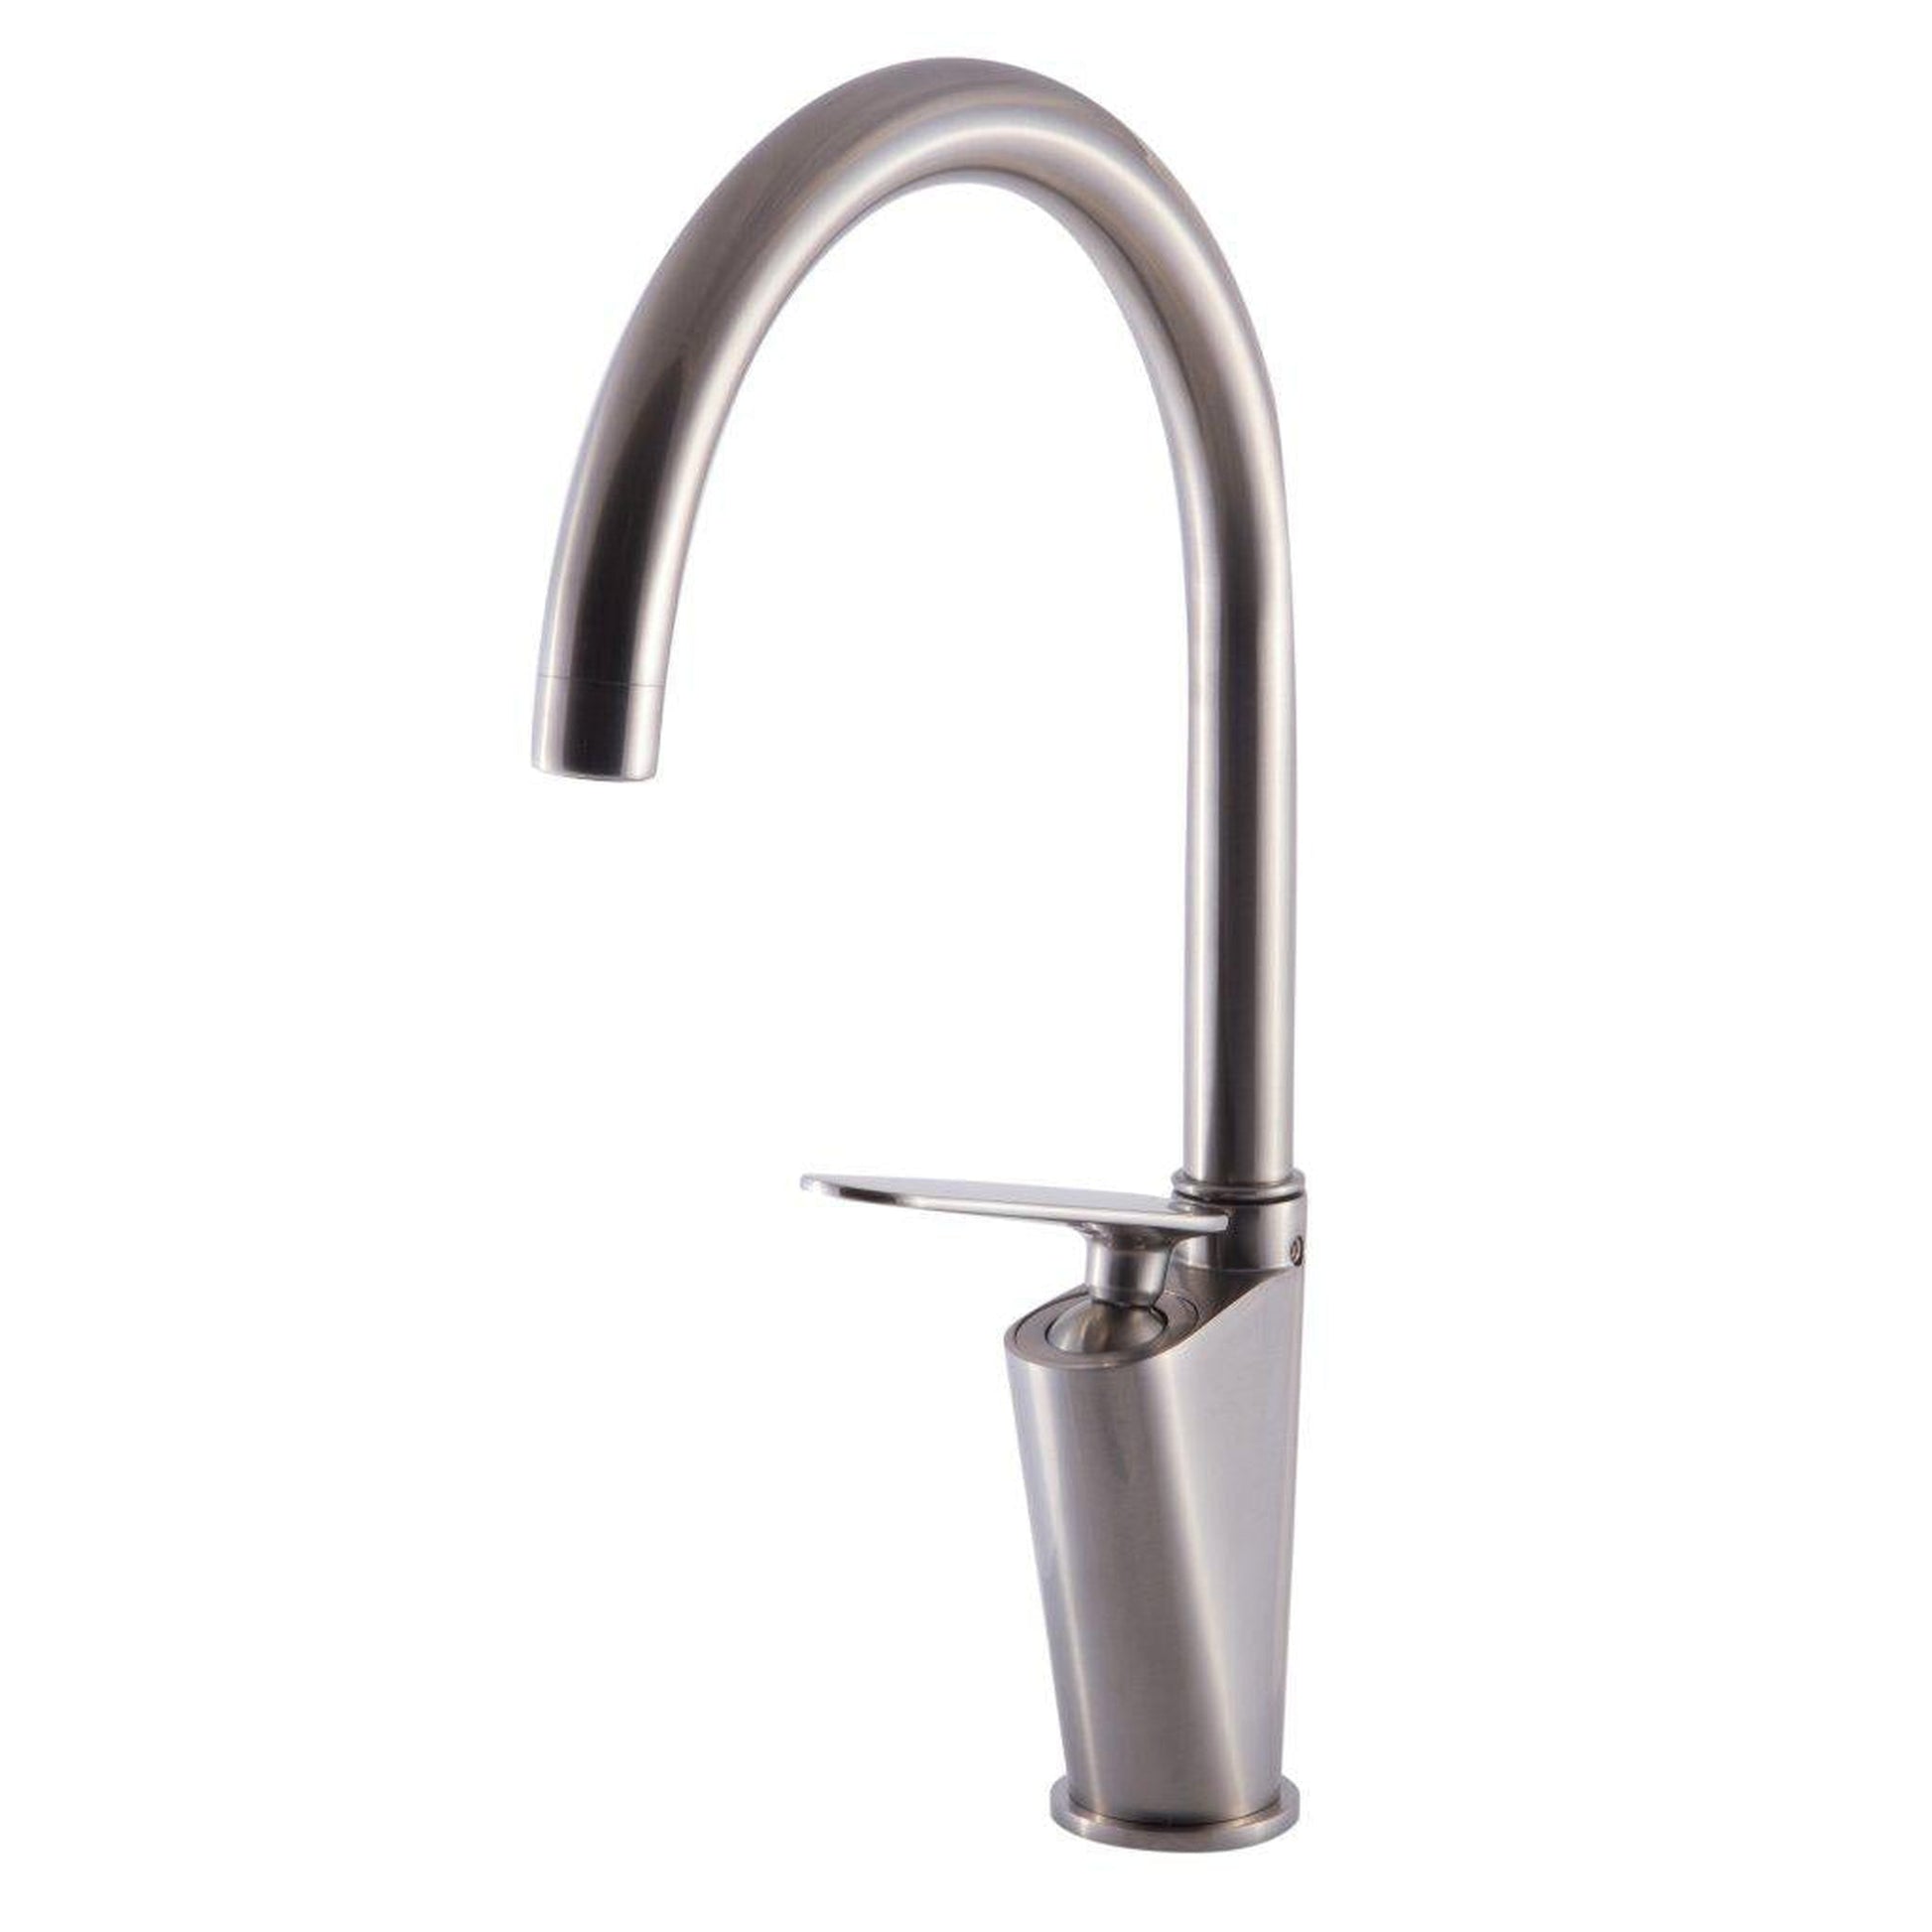 ALFI Brand AB3600-BN Brushed Nickel Vessel Gooseneck Spout Brass Bathroom Sink Faucet With Single Lever